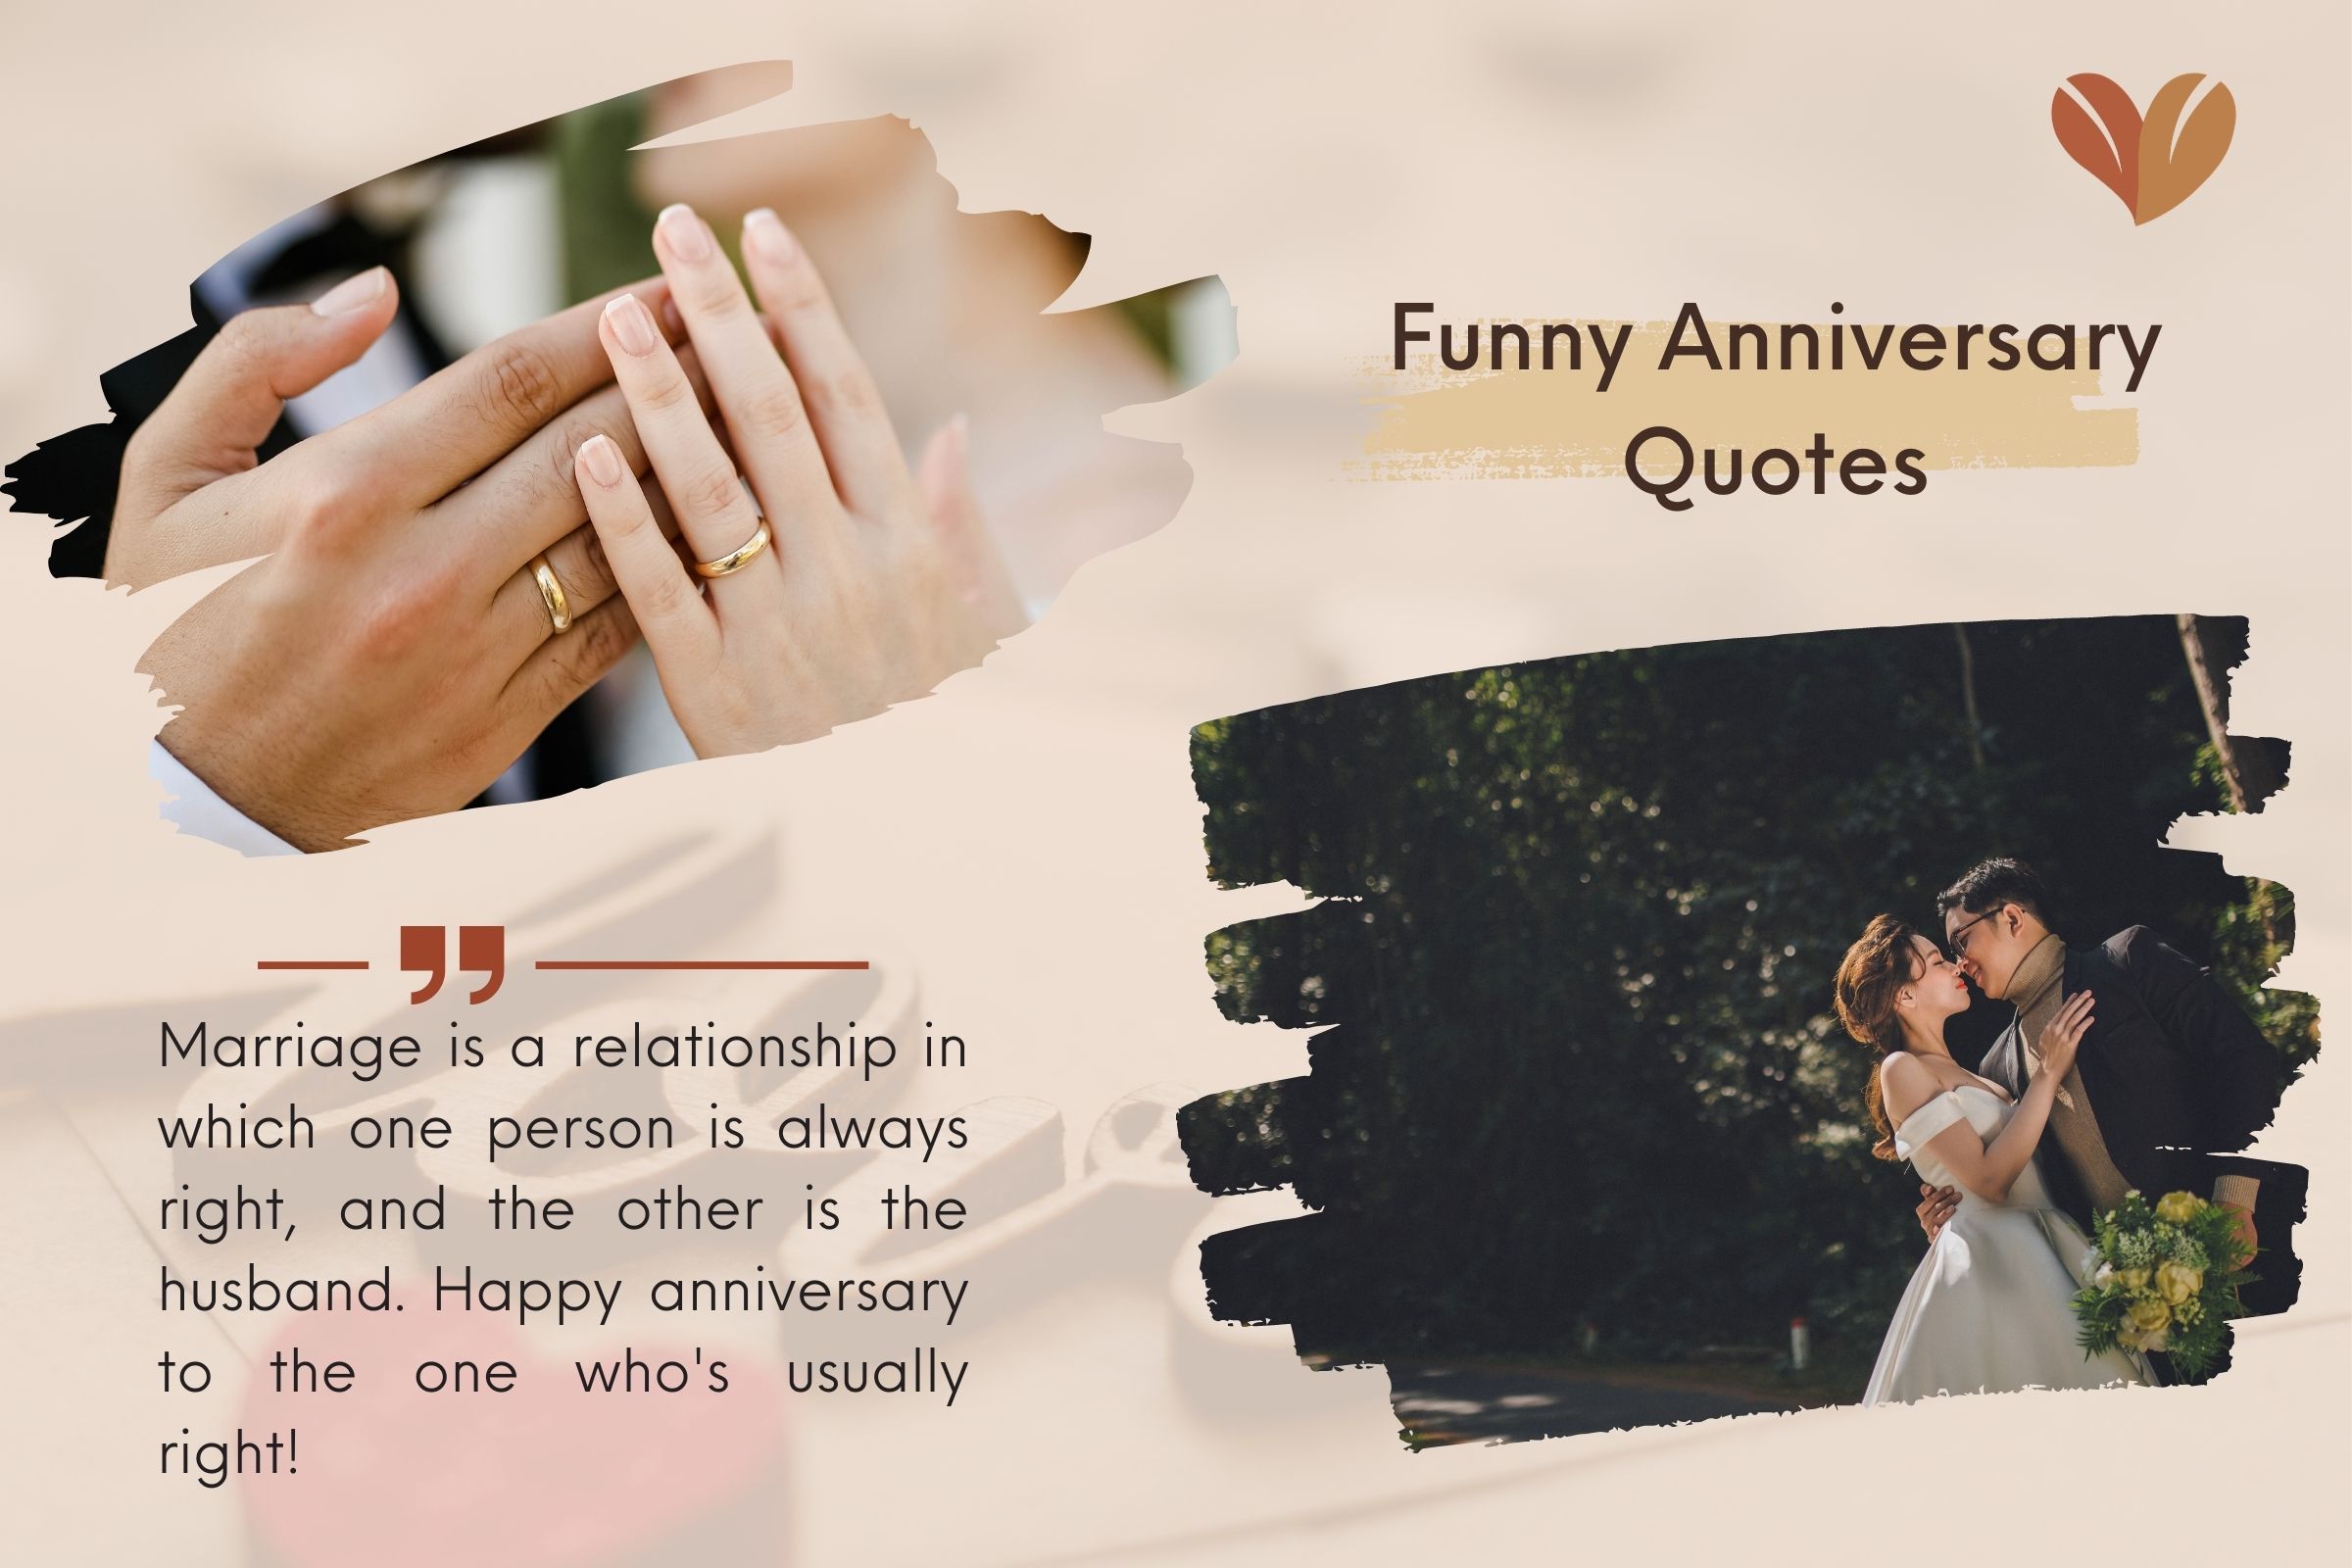 Some funny wishes for wedding anniversary message